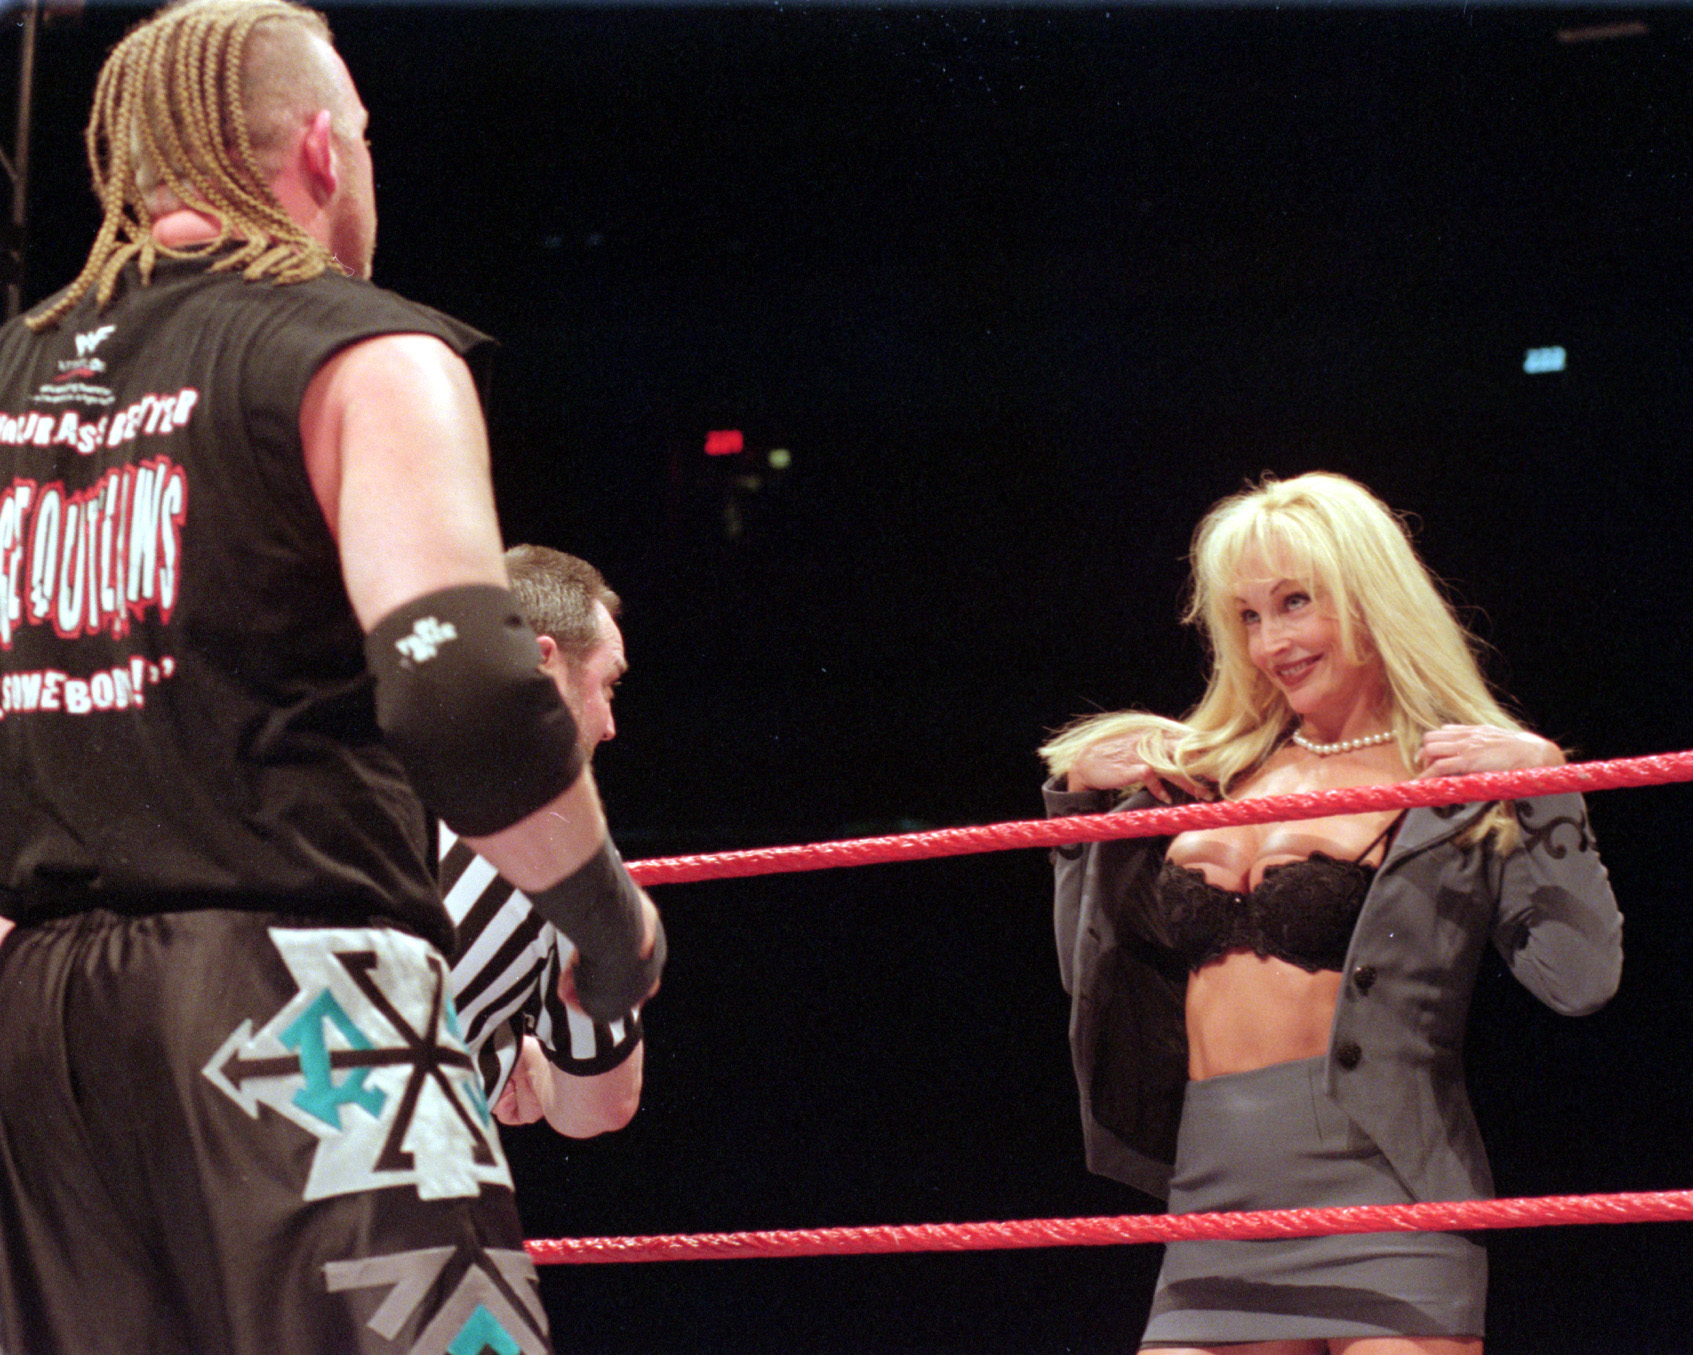 Debora,  a WWE diva, performs at the Skydome in Toronto on April 23, 1999